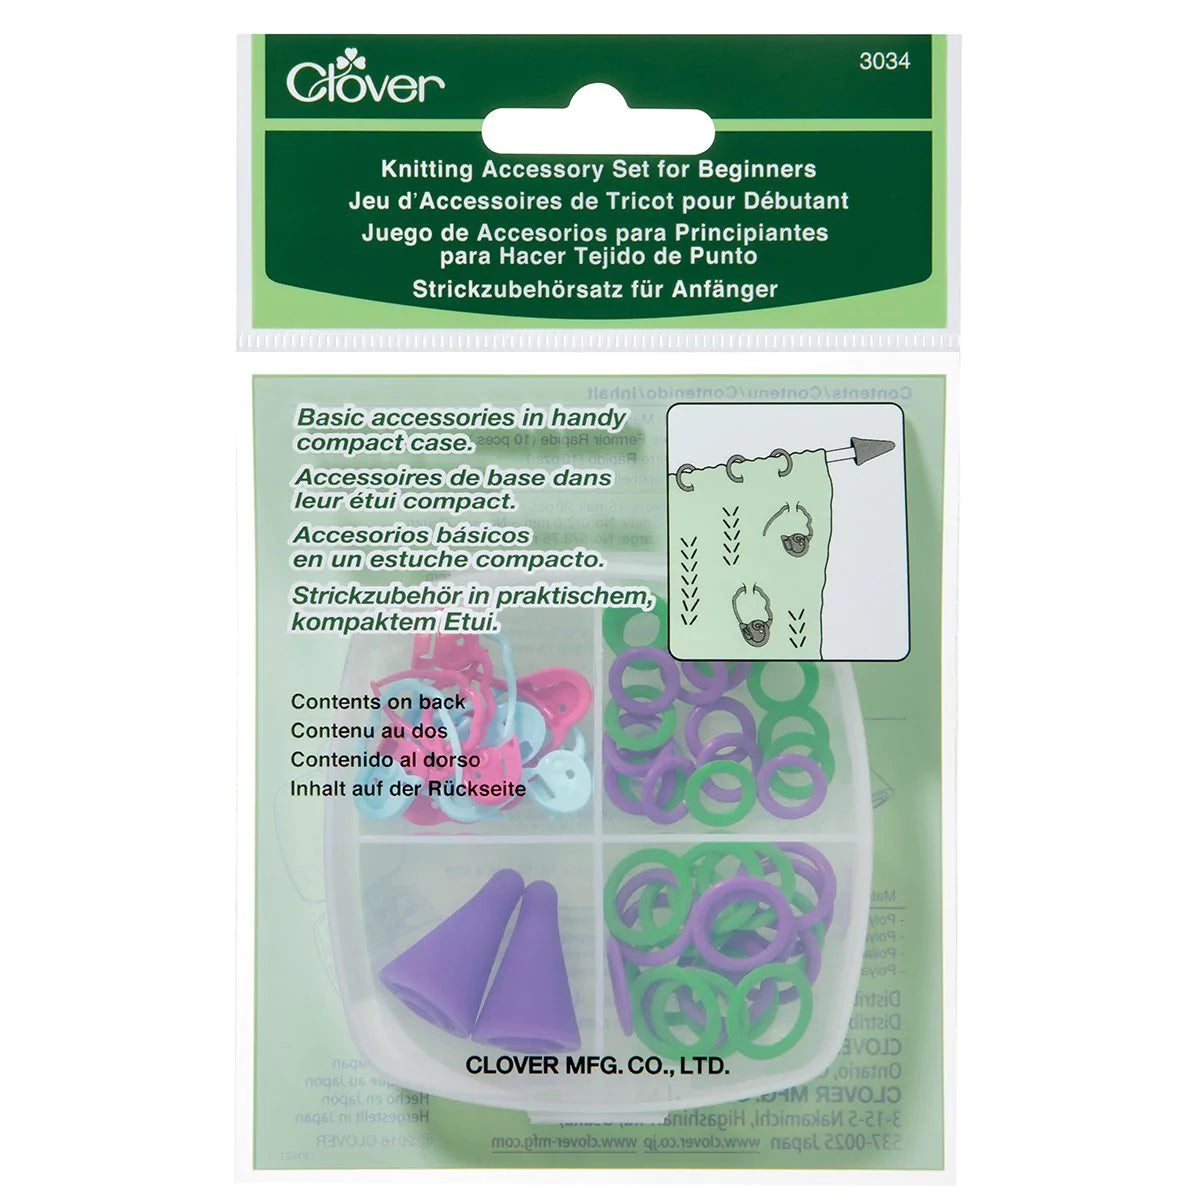 Clover Knitting Accessory